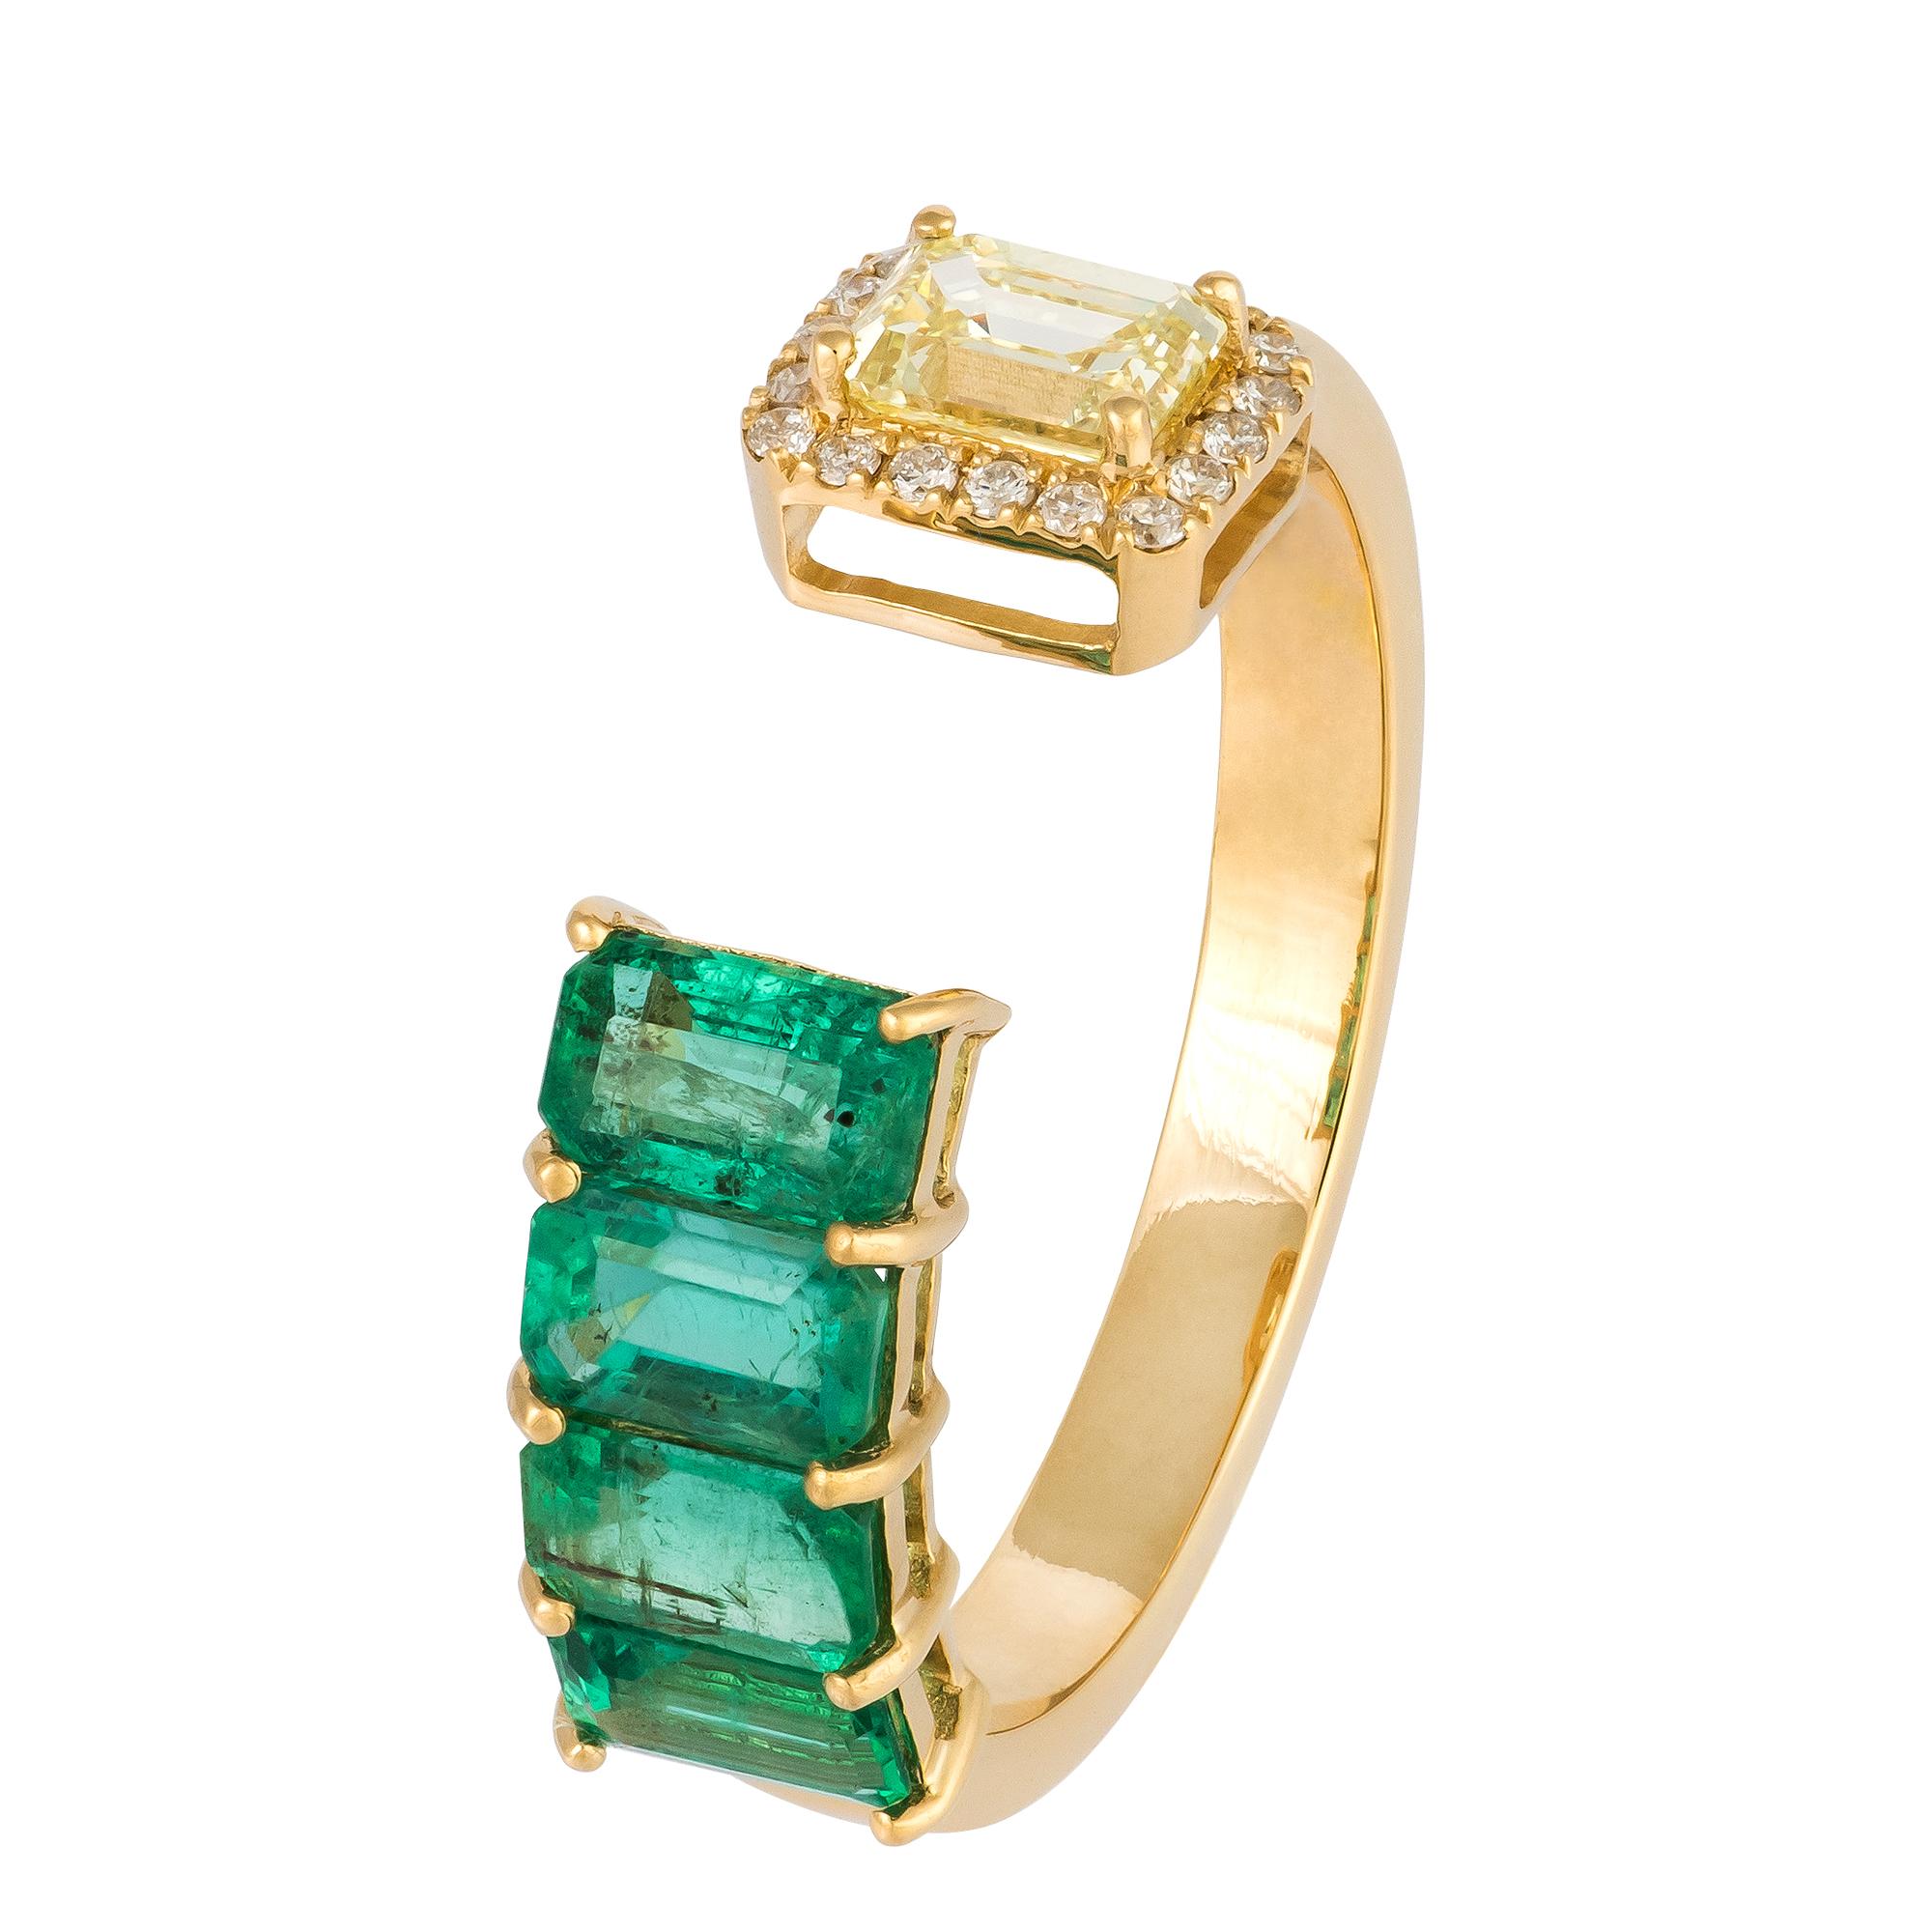 For Sale:  Impressive Emerald Yellow 18K Gold White Diamond Ring for Her 3